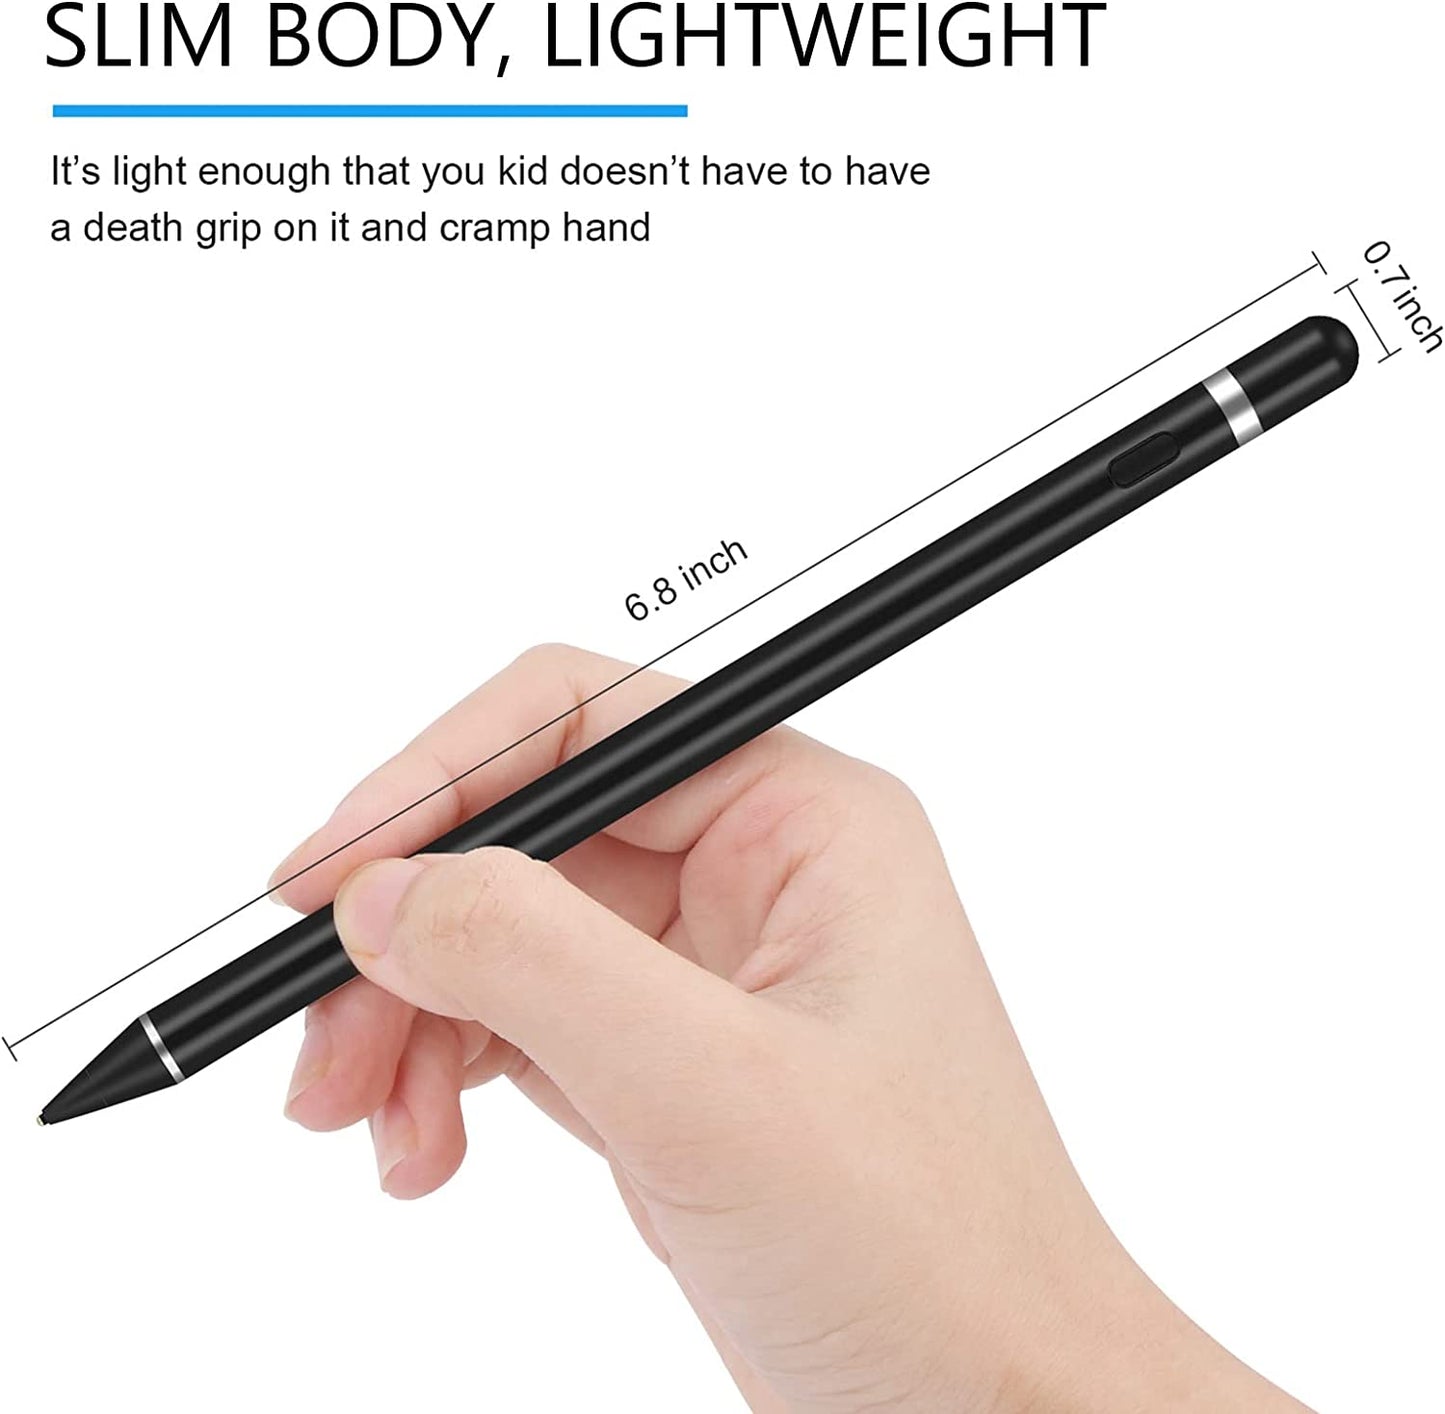 Active Stylus Pen Digital Capacitive Touch Rechargeable Palm Rejection - OND37